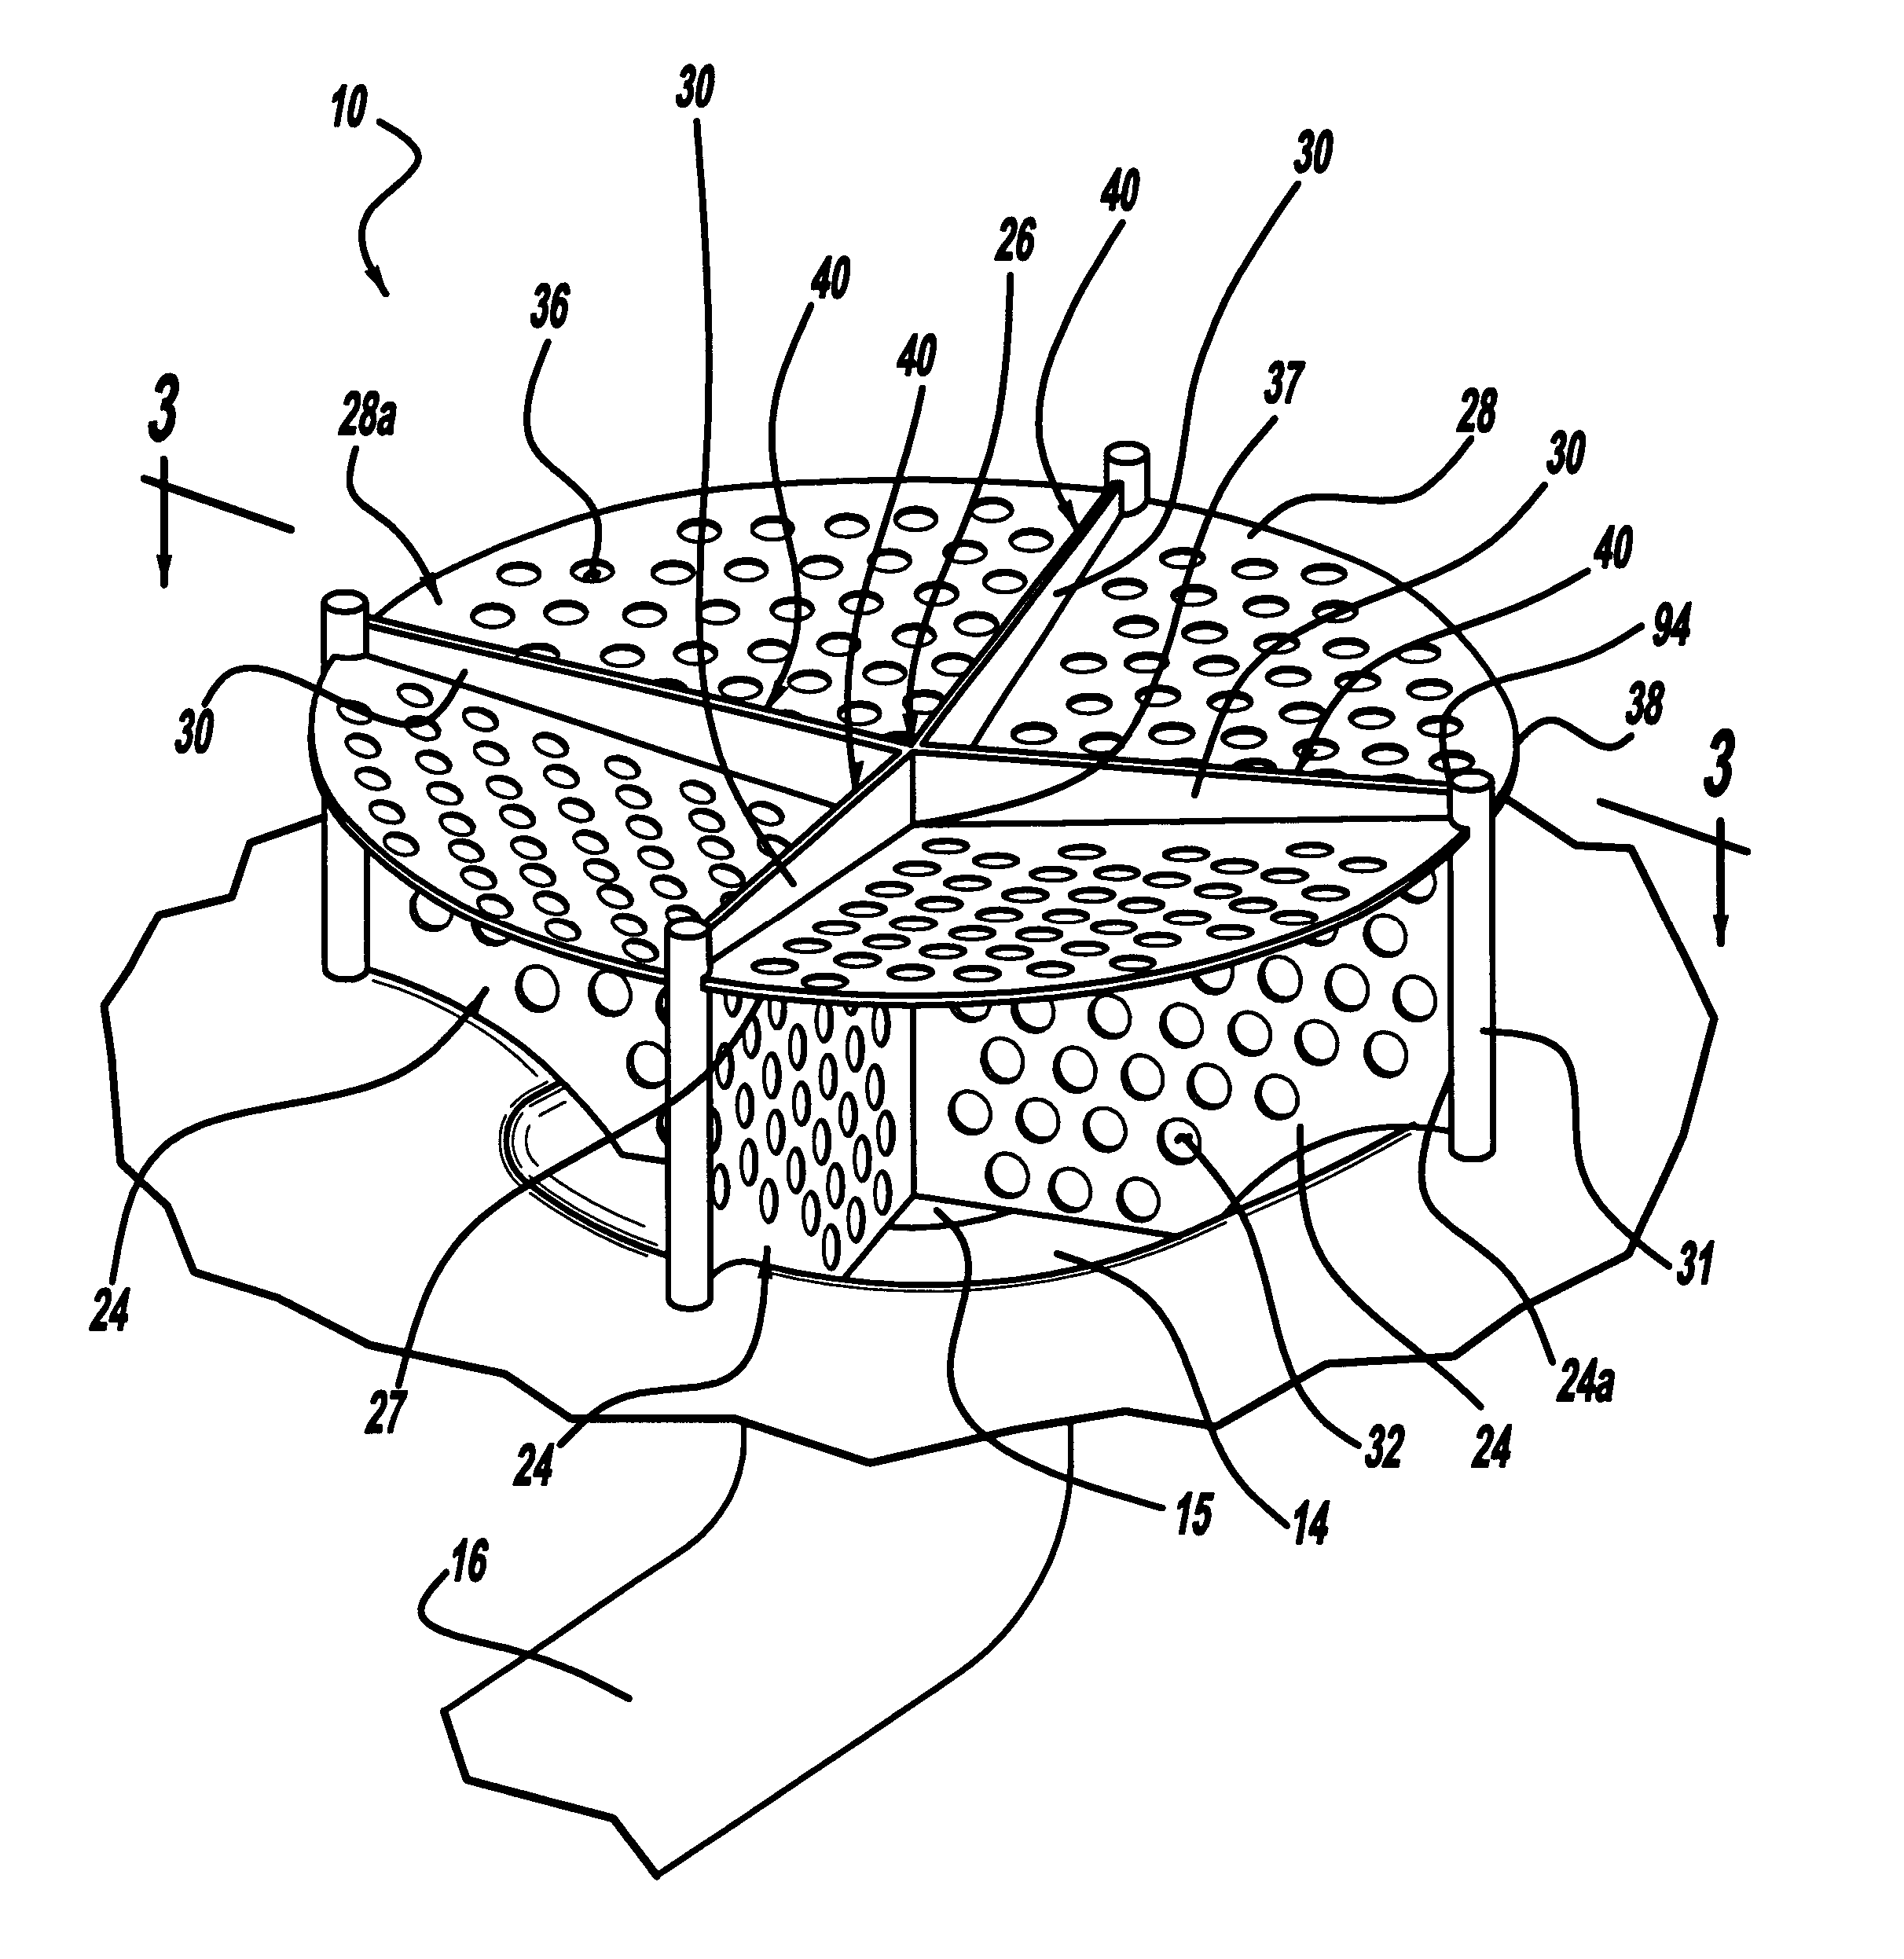 Variable-gravity anti-vortex and vapor-ingestion-suppression device